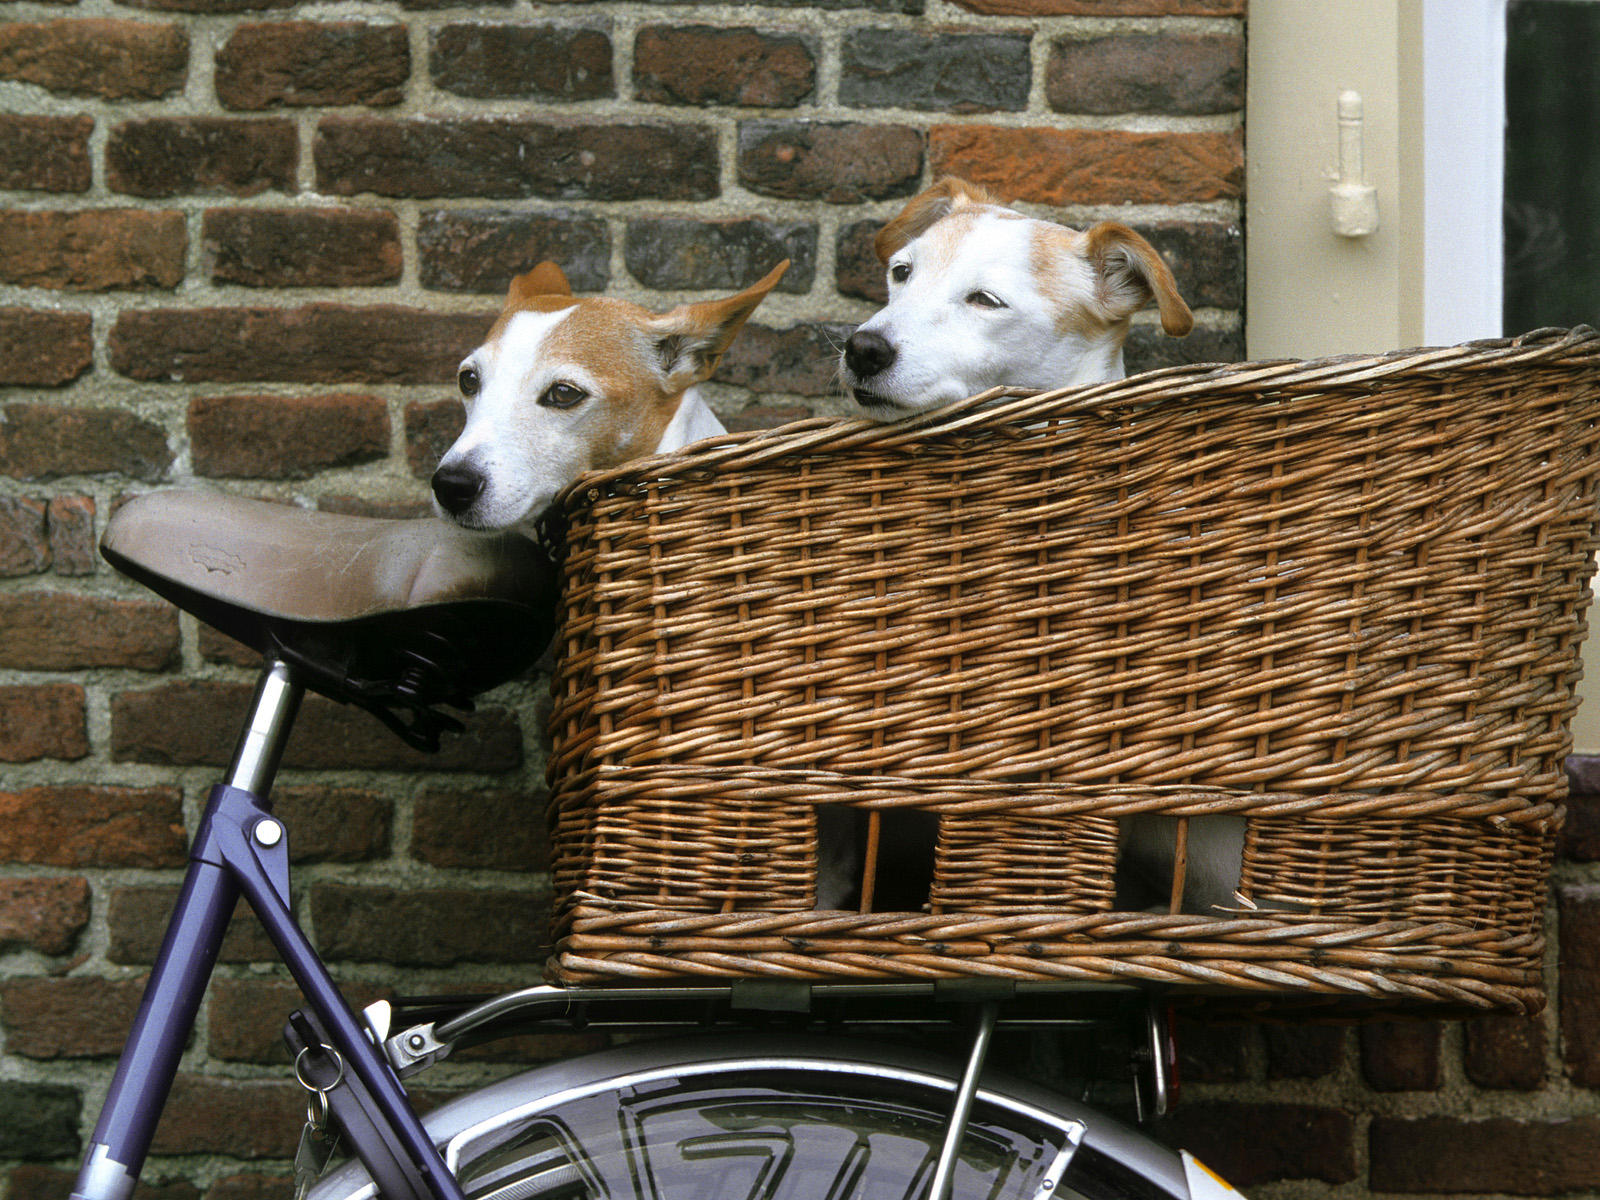 Terrierman's Daily Dose Bicycle Baskets for the Dogs